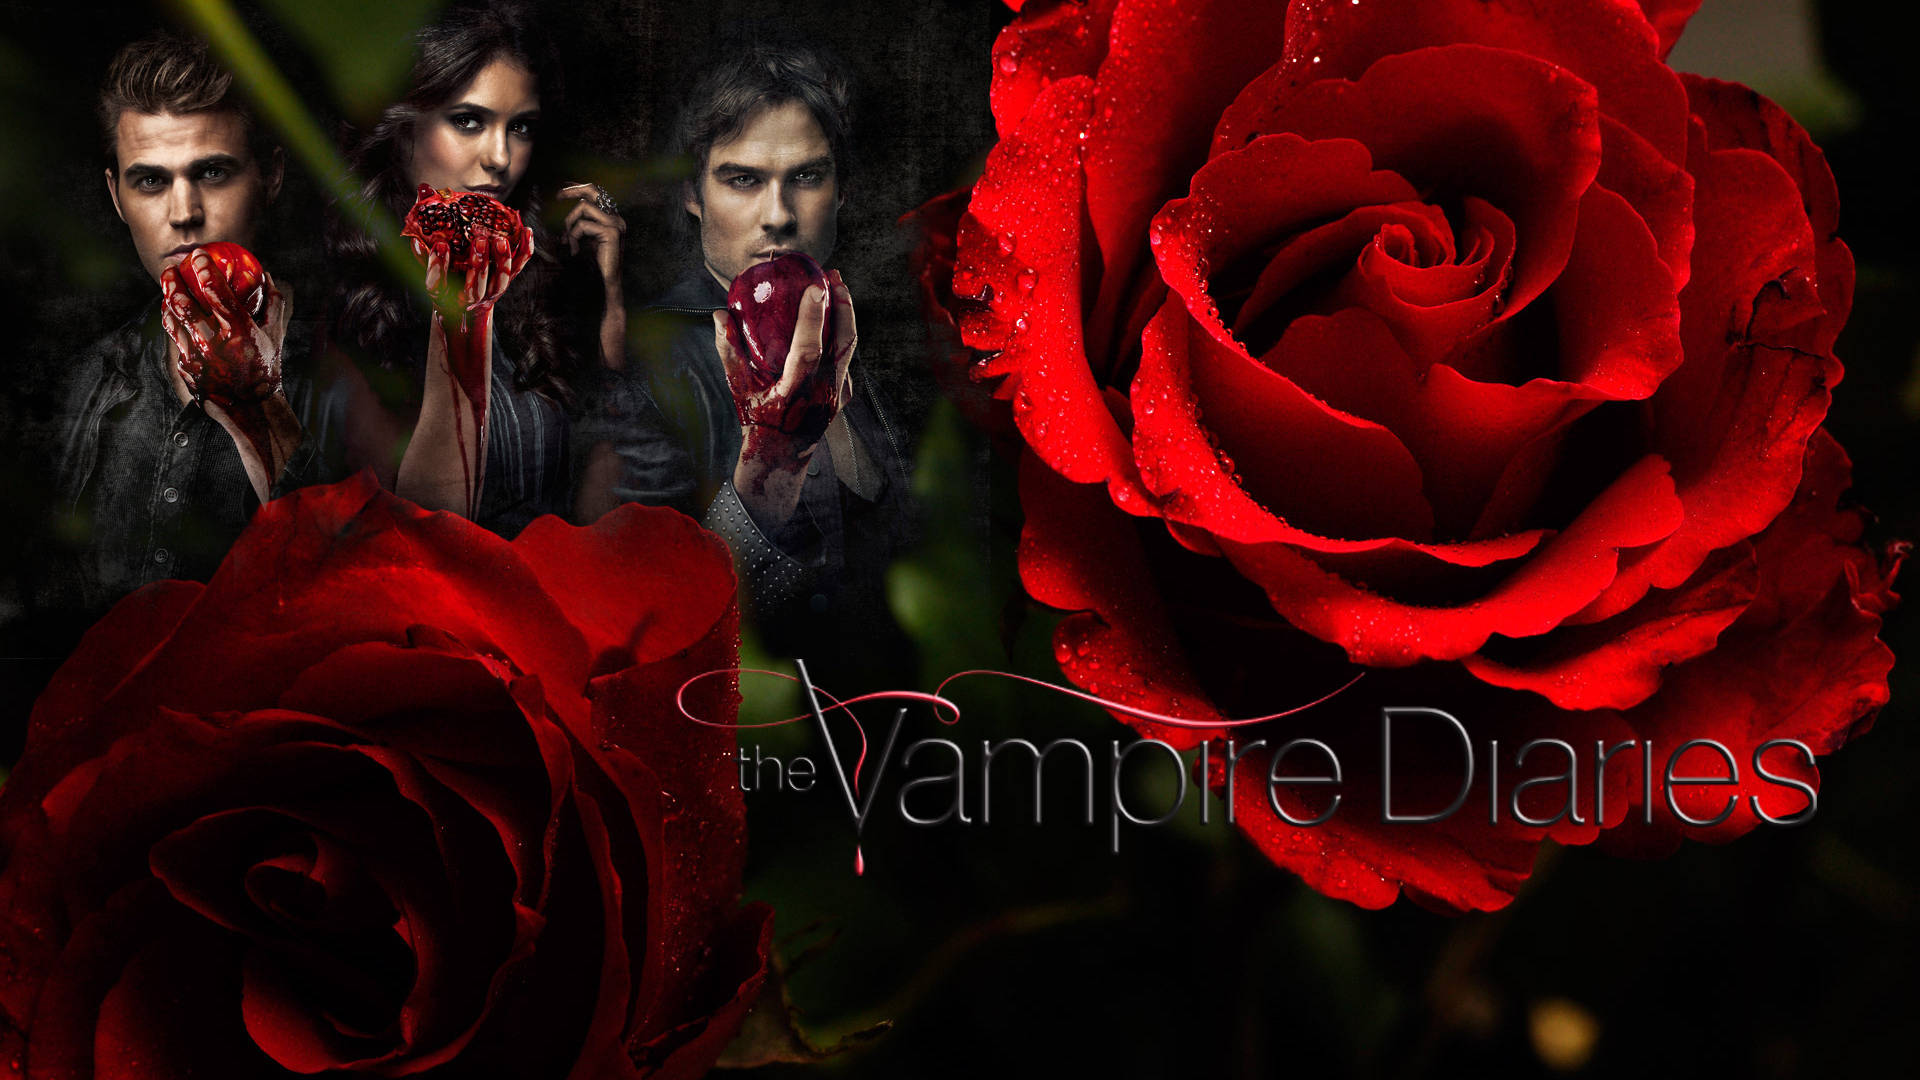 The Vampire Diaries Poster With Red Roses Wallpaper